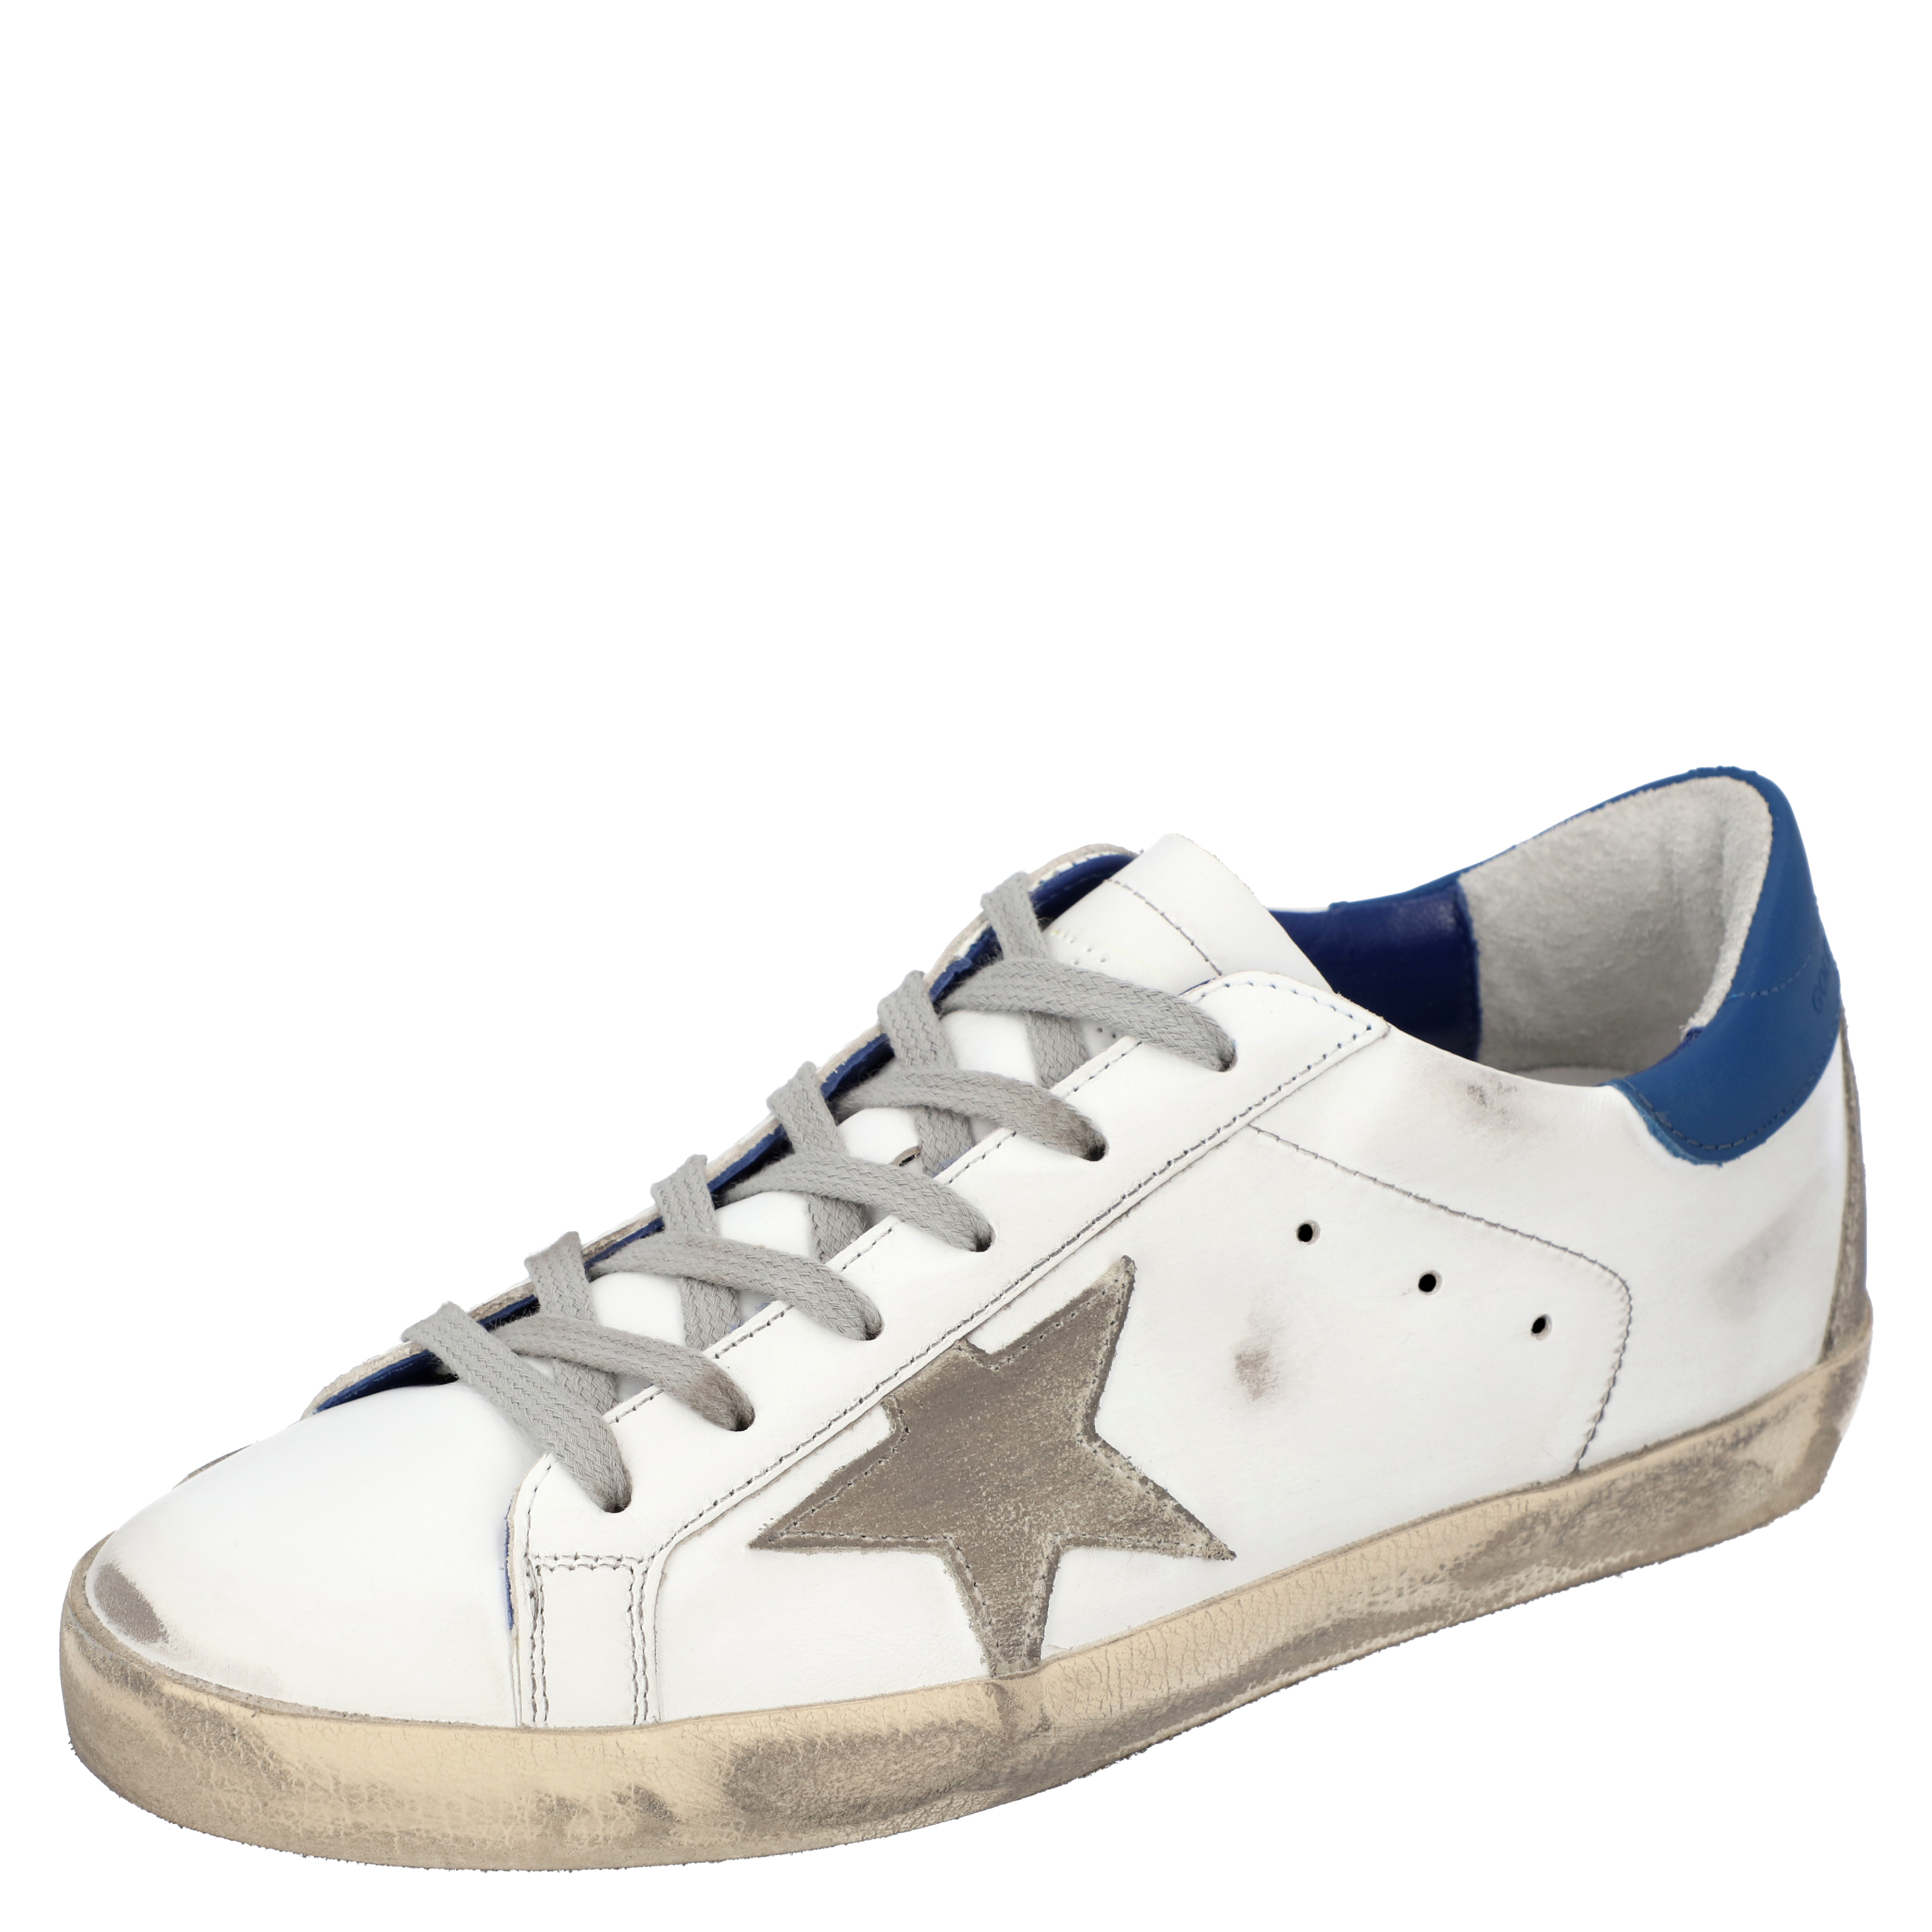 Golden Goose White/Blue Leather Superstar Sneakers Size EU 37